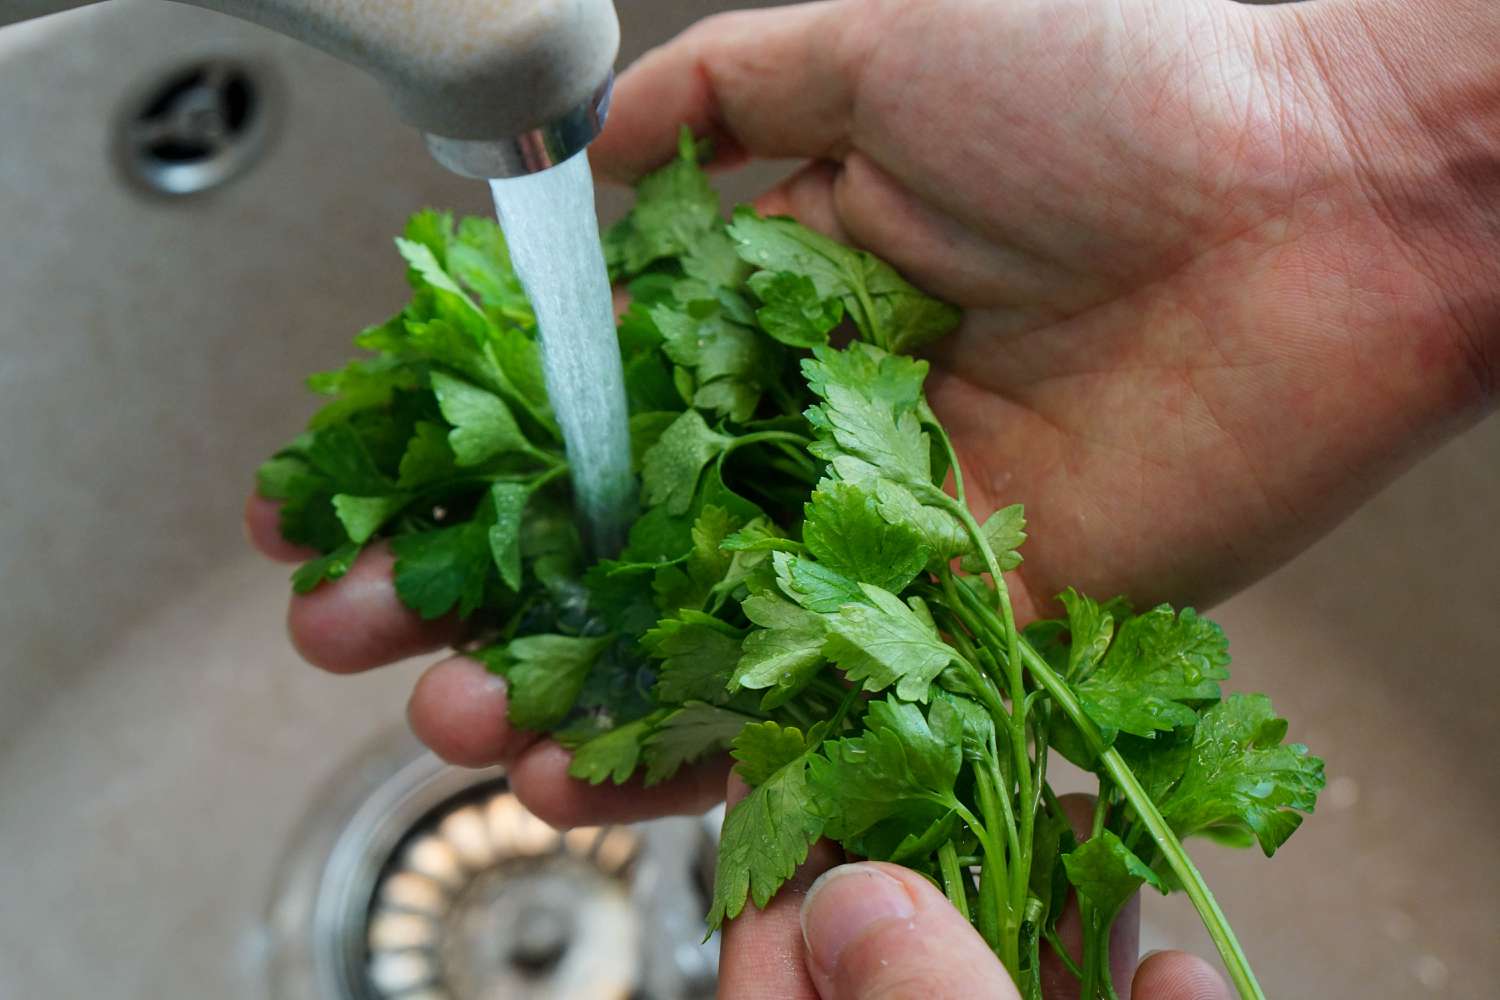 https://recipes.net/wp-content/uploads/2023/09/how-to-wash-and-chop-herbs-a-step-by-step-guide-1695101076.jpg